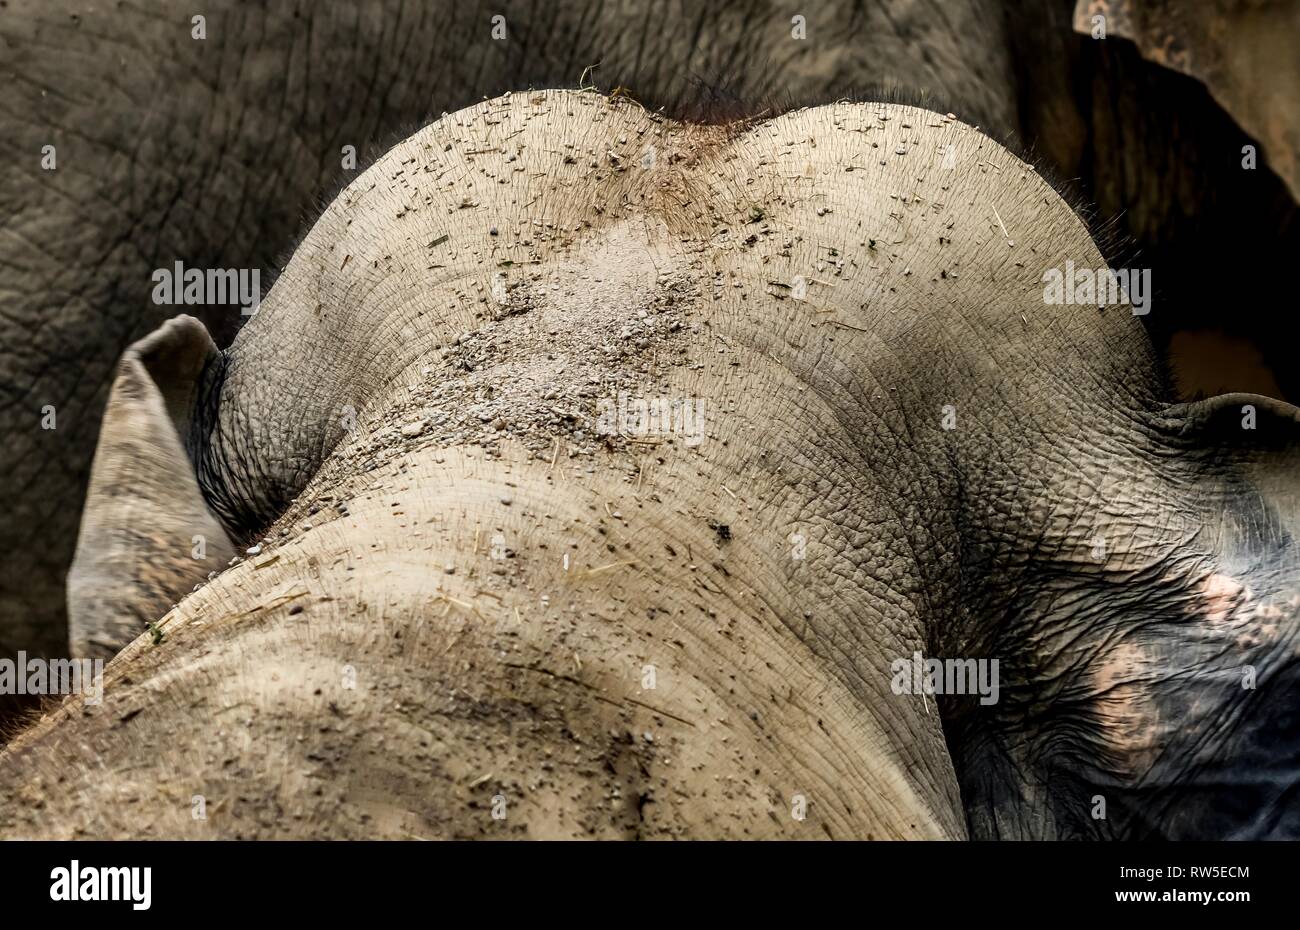 baby elephant head from back portrait, strong rough elephant skin texture Stock Photo